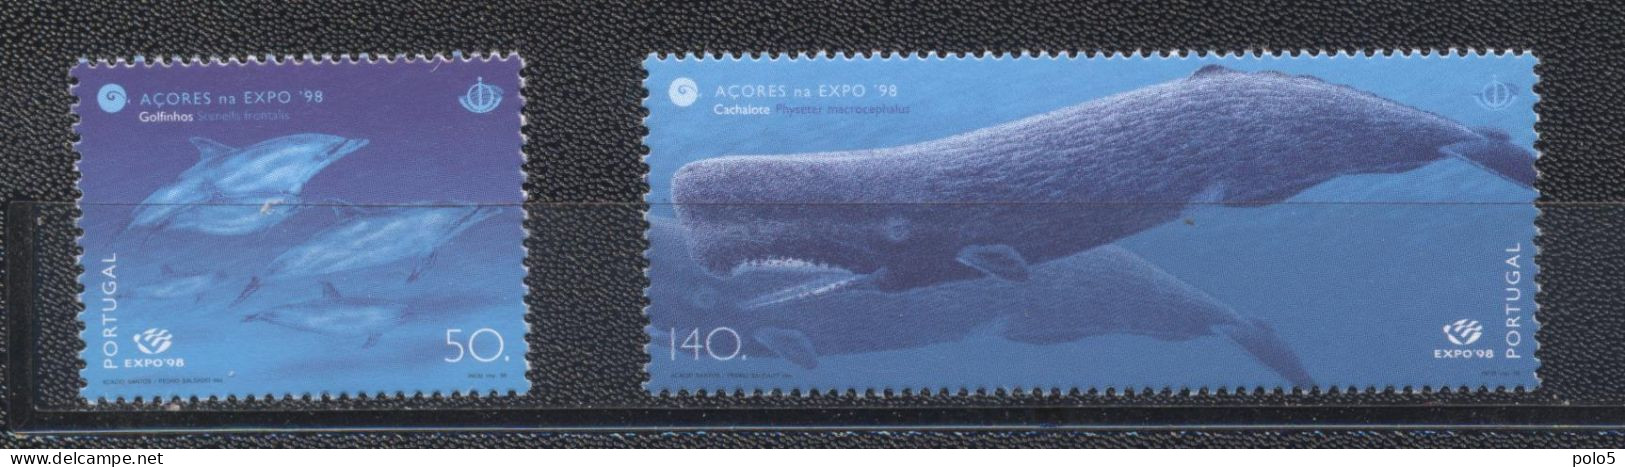 Açores 1998- World EXPO '98 Lisbon Toothed Whales Set (2v) - Azores